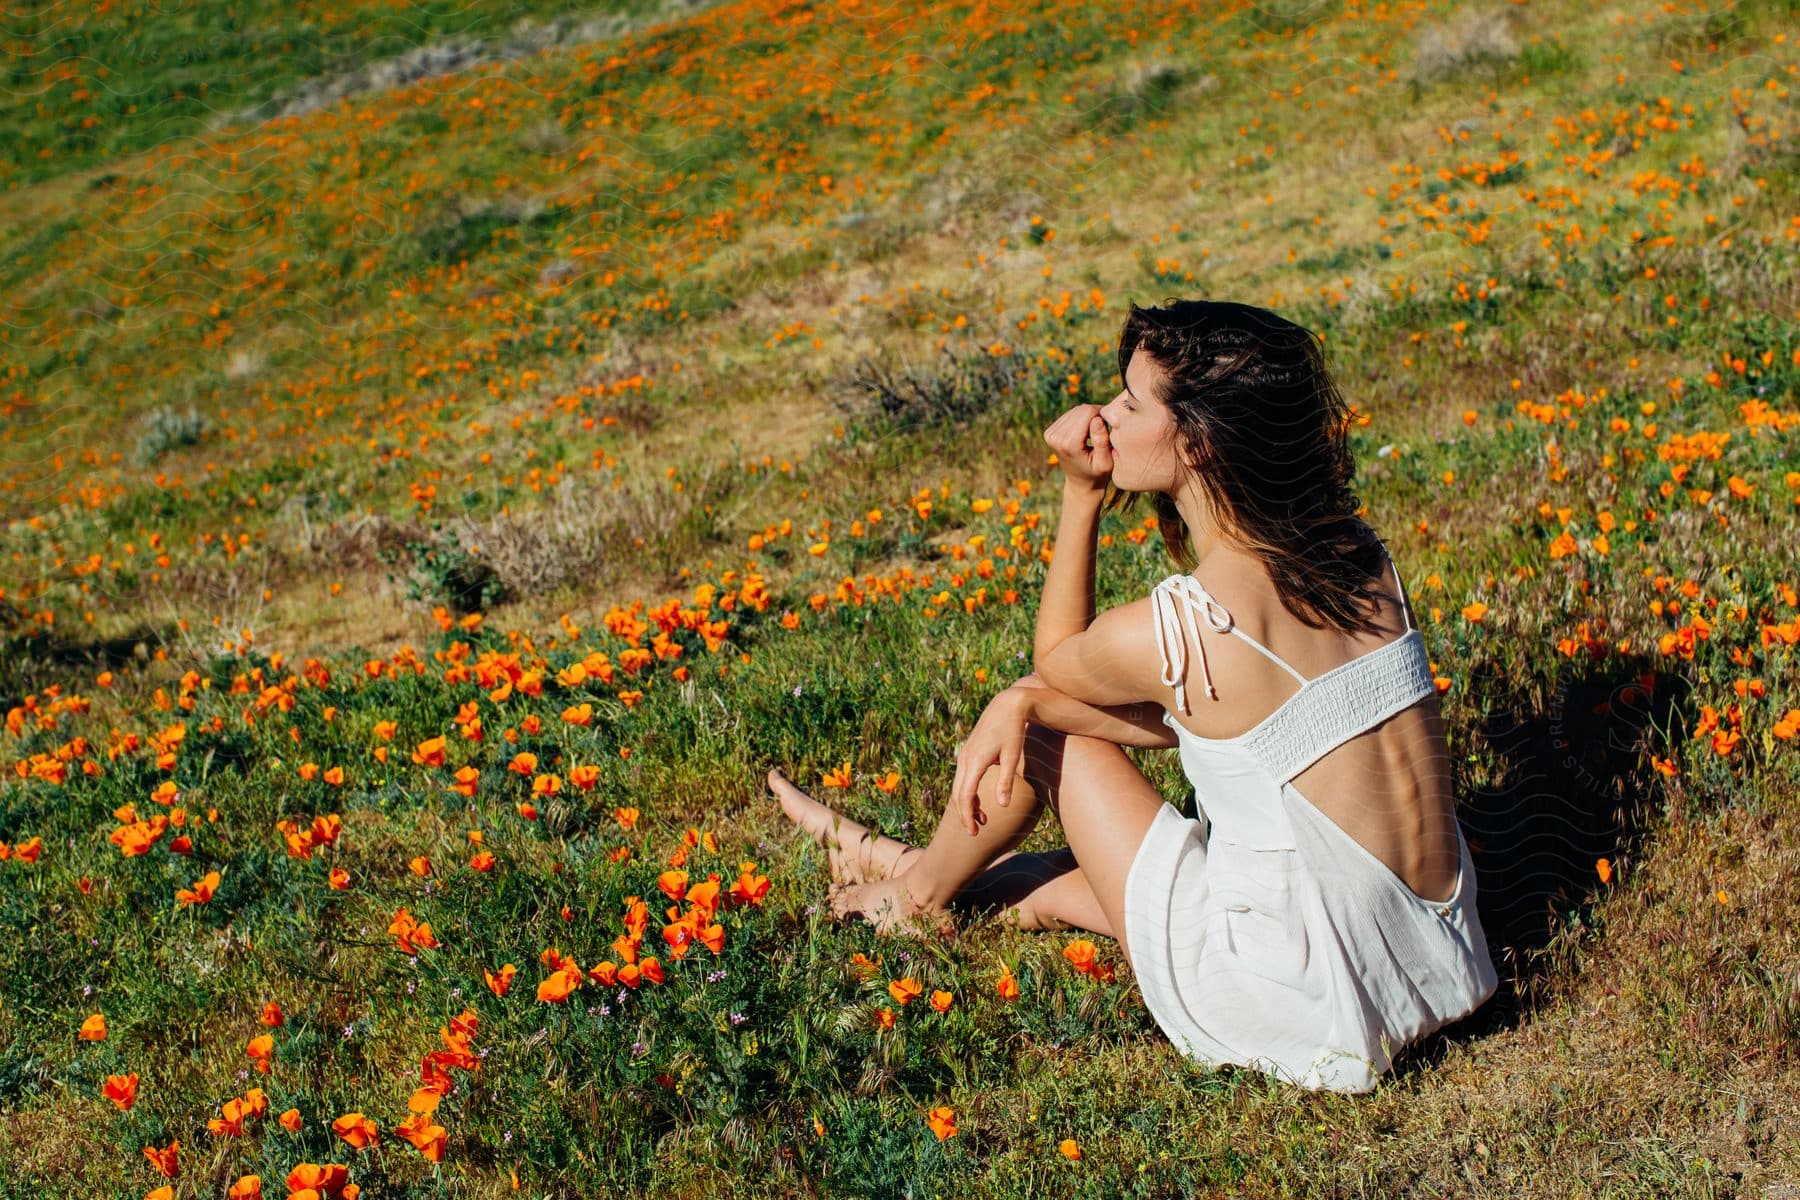 Woman sits among wildflowers on grassy slope in short summer dress.